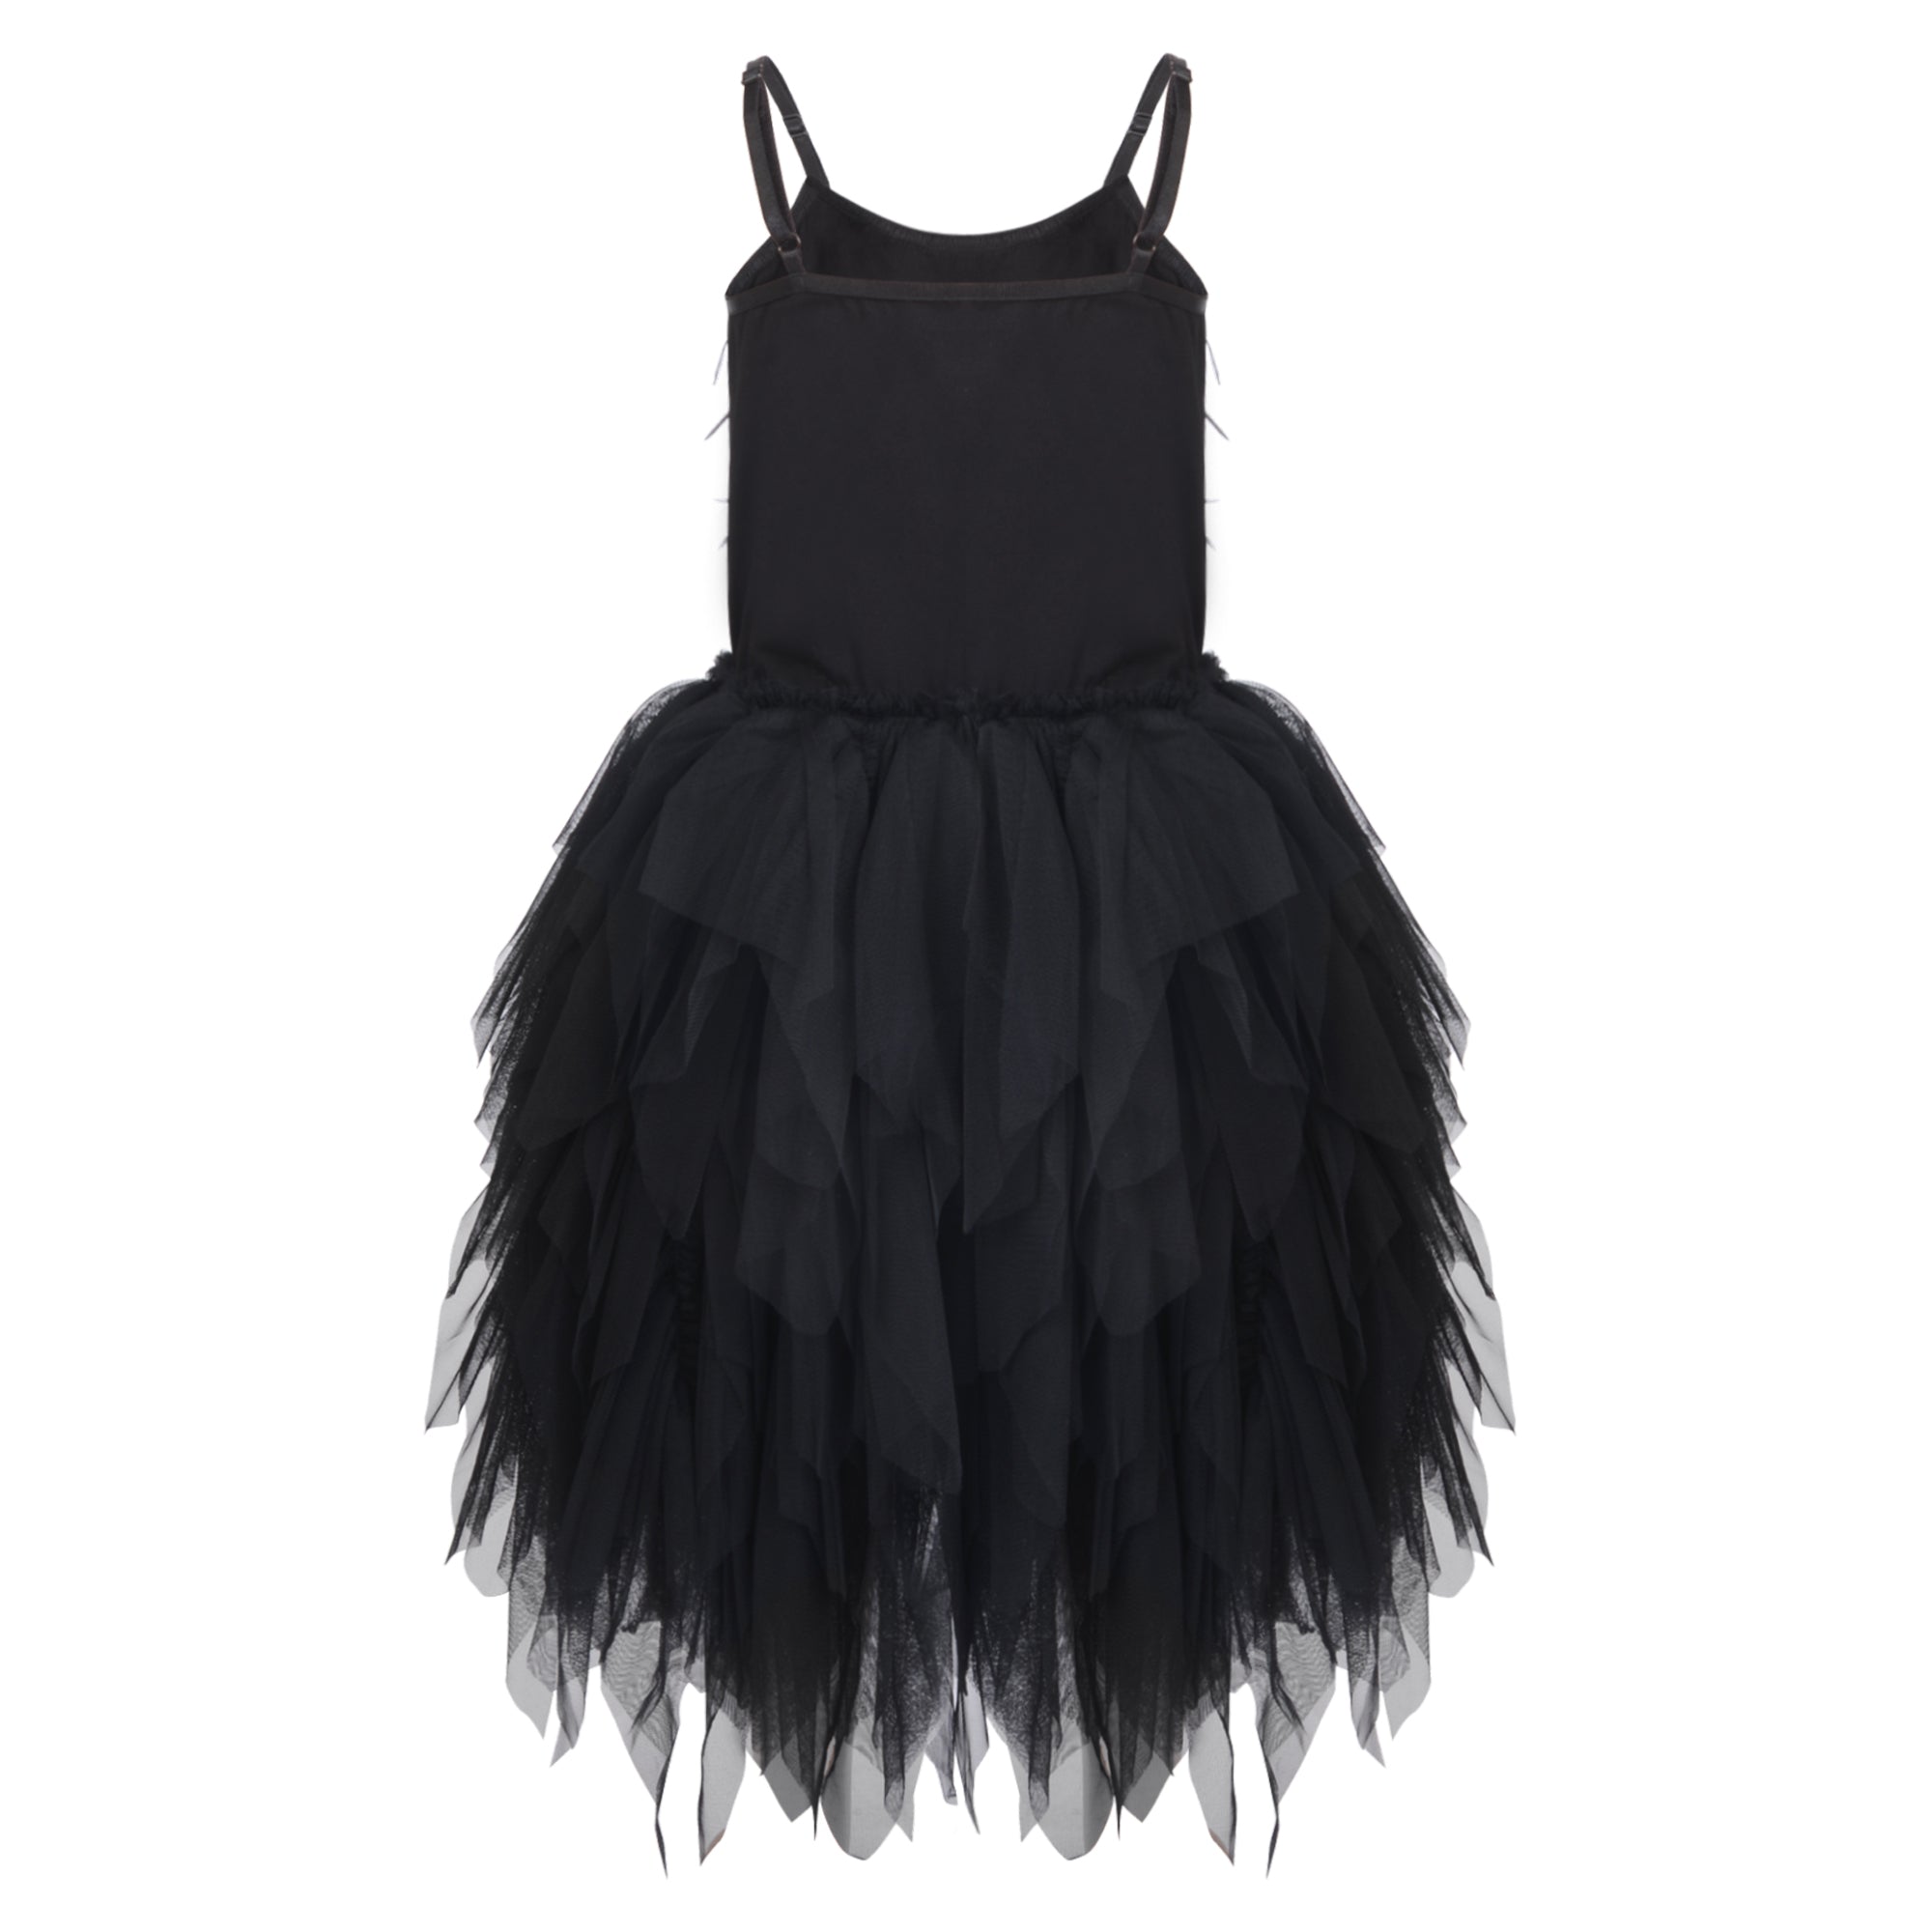 Girls black Frilly and Feathers Dress